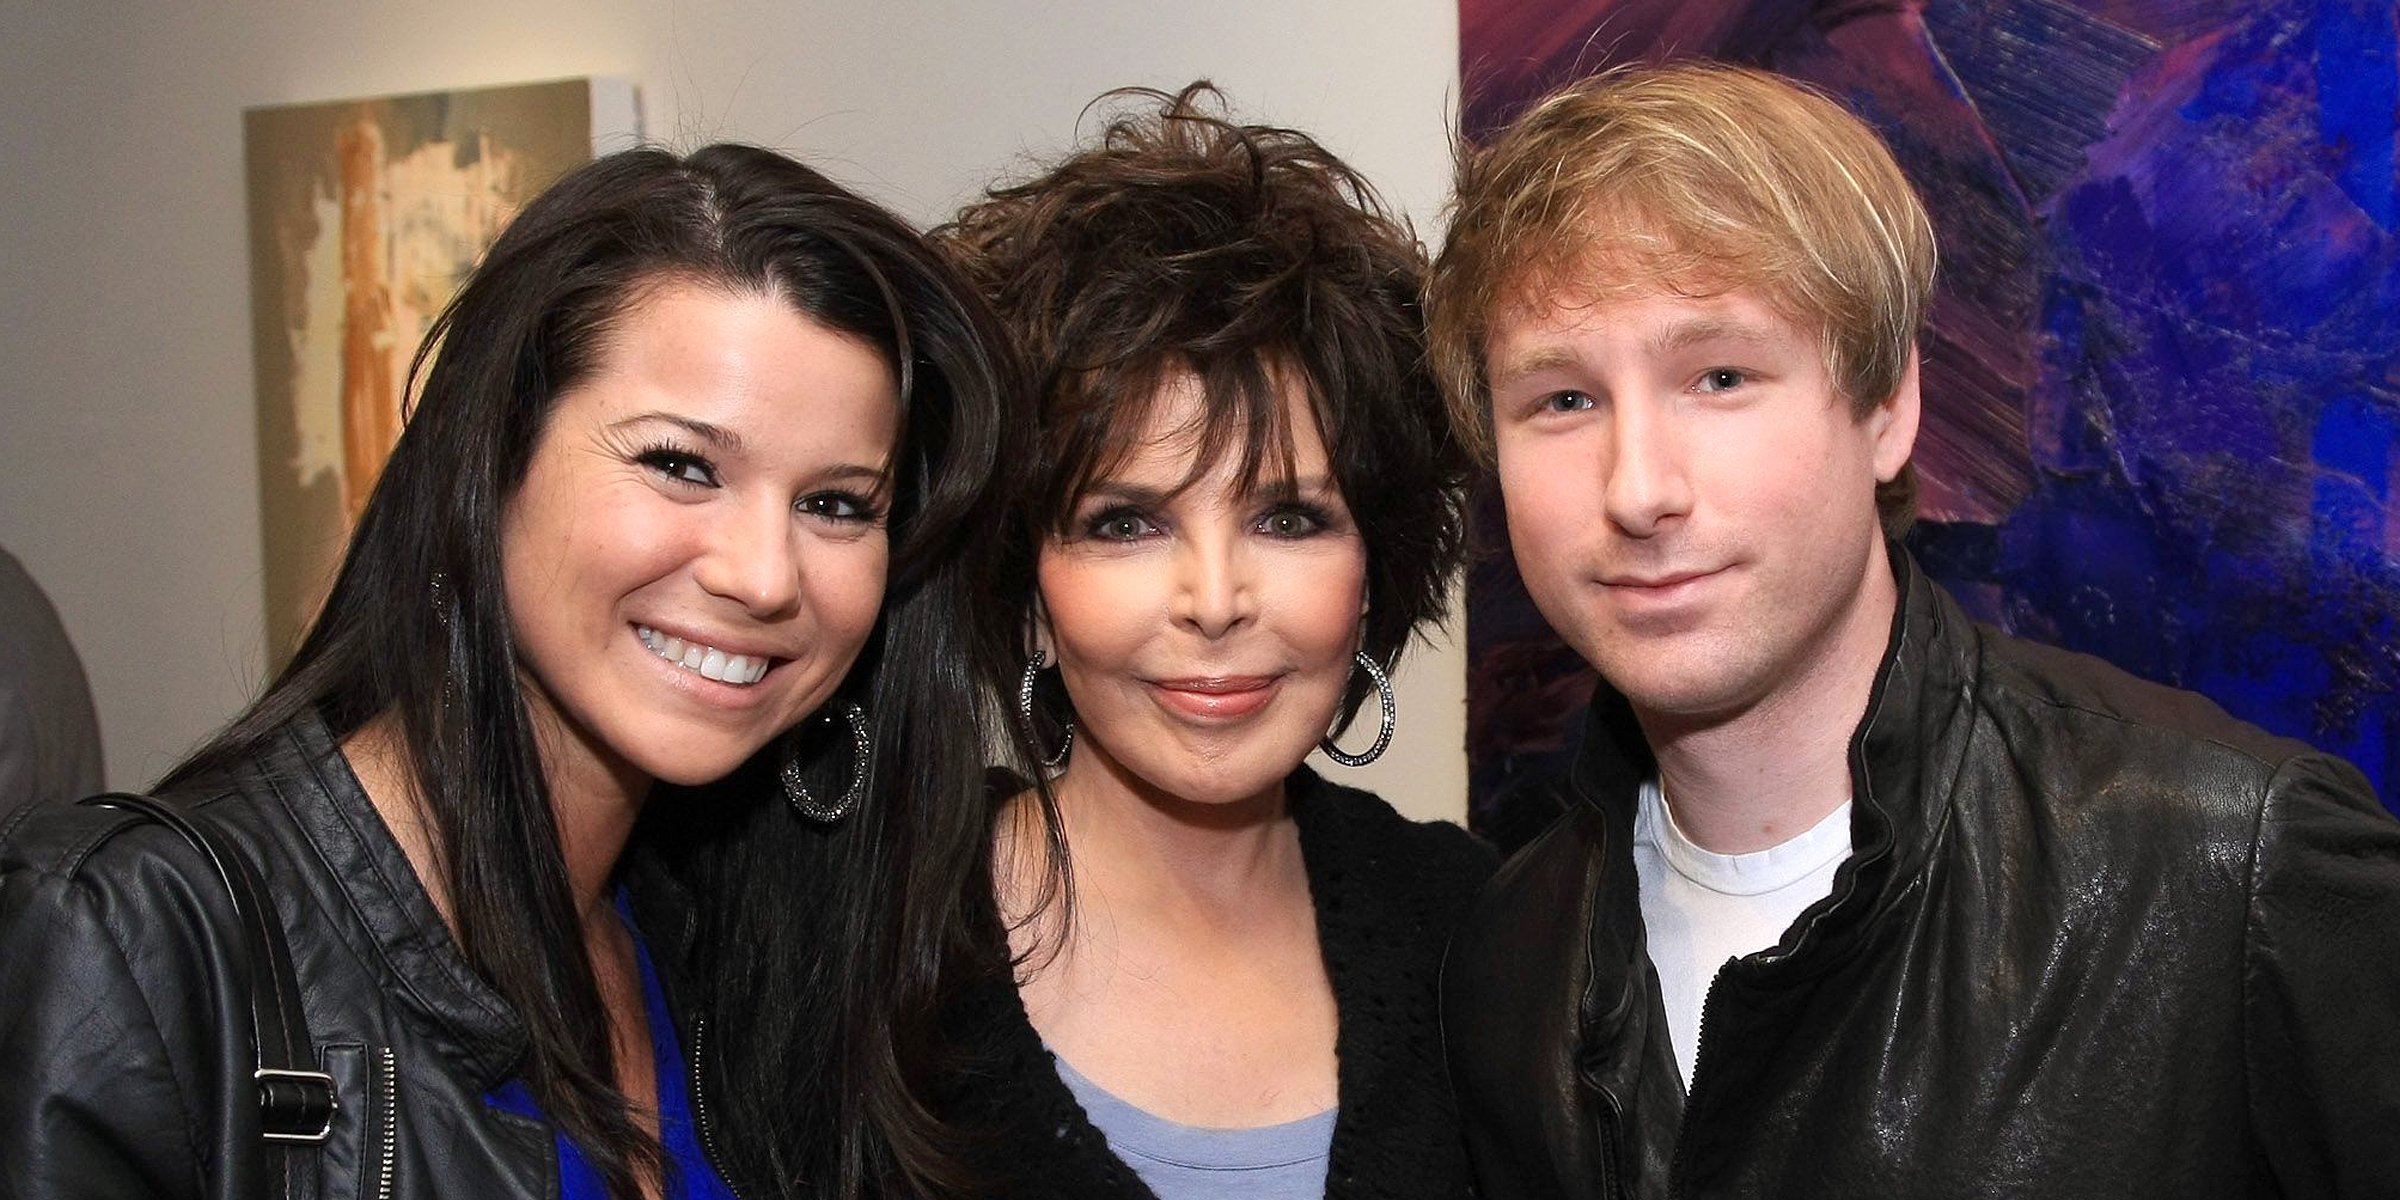 Artist Carole Bayer Sager (C) and her son Christopher Bacharach on January 13, 2011, in West Hollywood, California. | Source: Getty Images